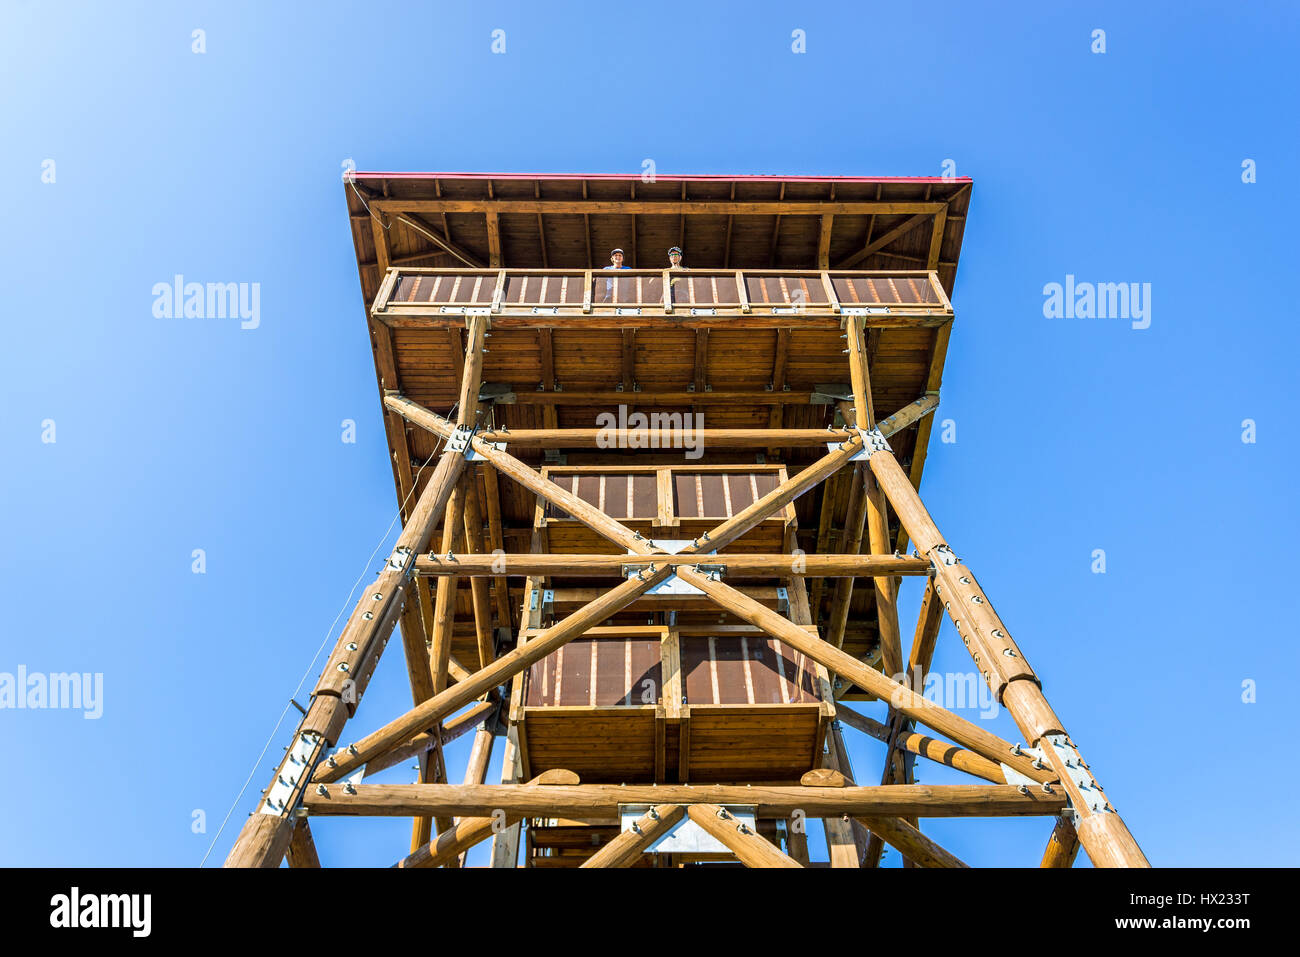 Observation Tower for tourists in Fojutowo village in Kuyavian-Pomeranian Voivodeship in Poland Stock Photo